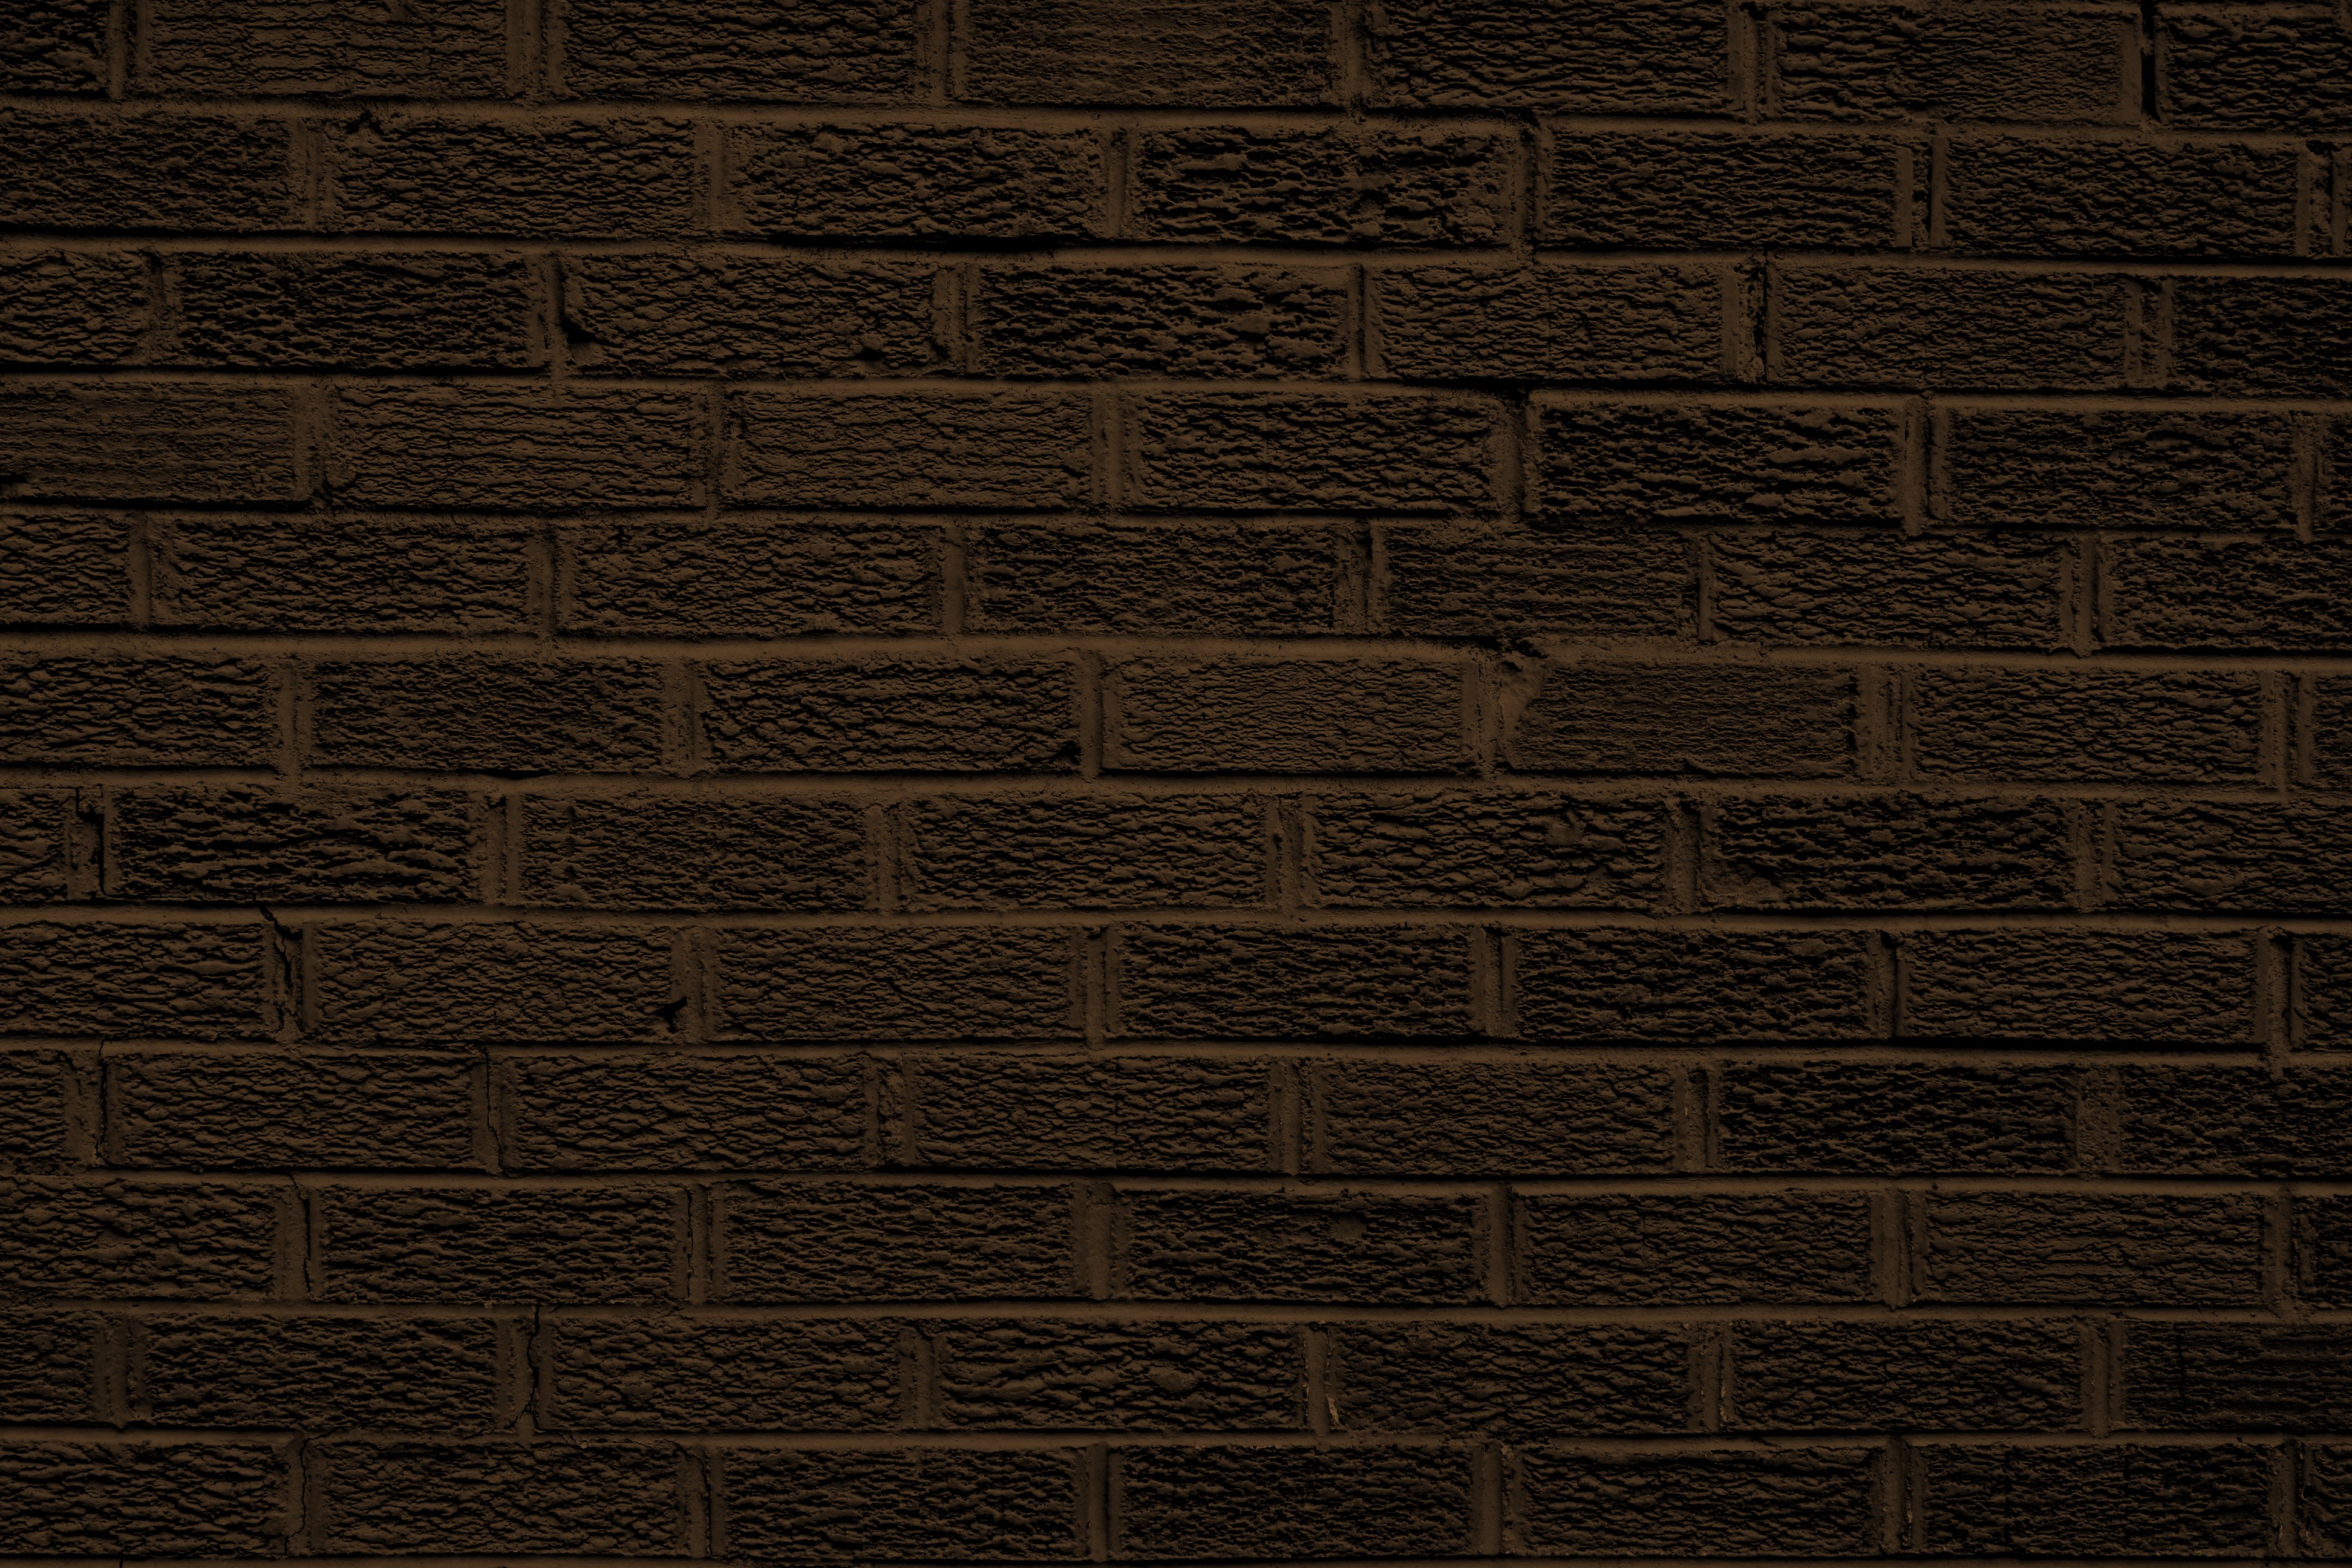 Brown Brick Wall Texture Picture Free Photograph Photos Public